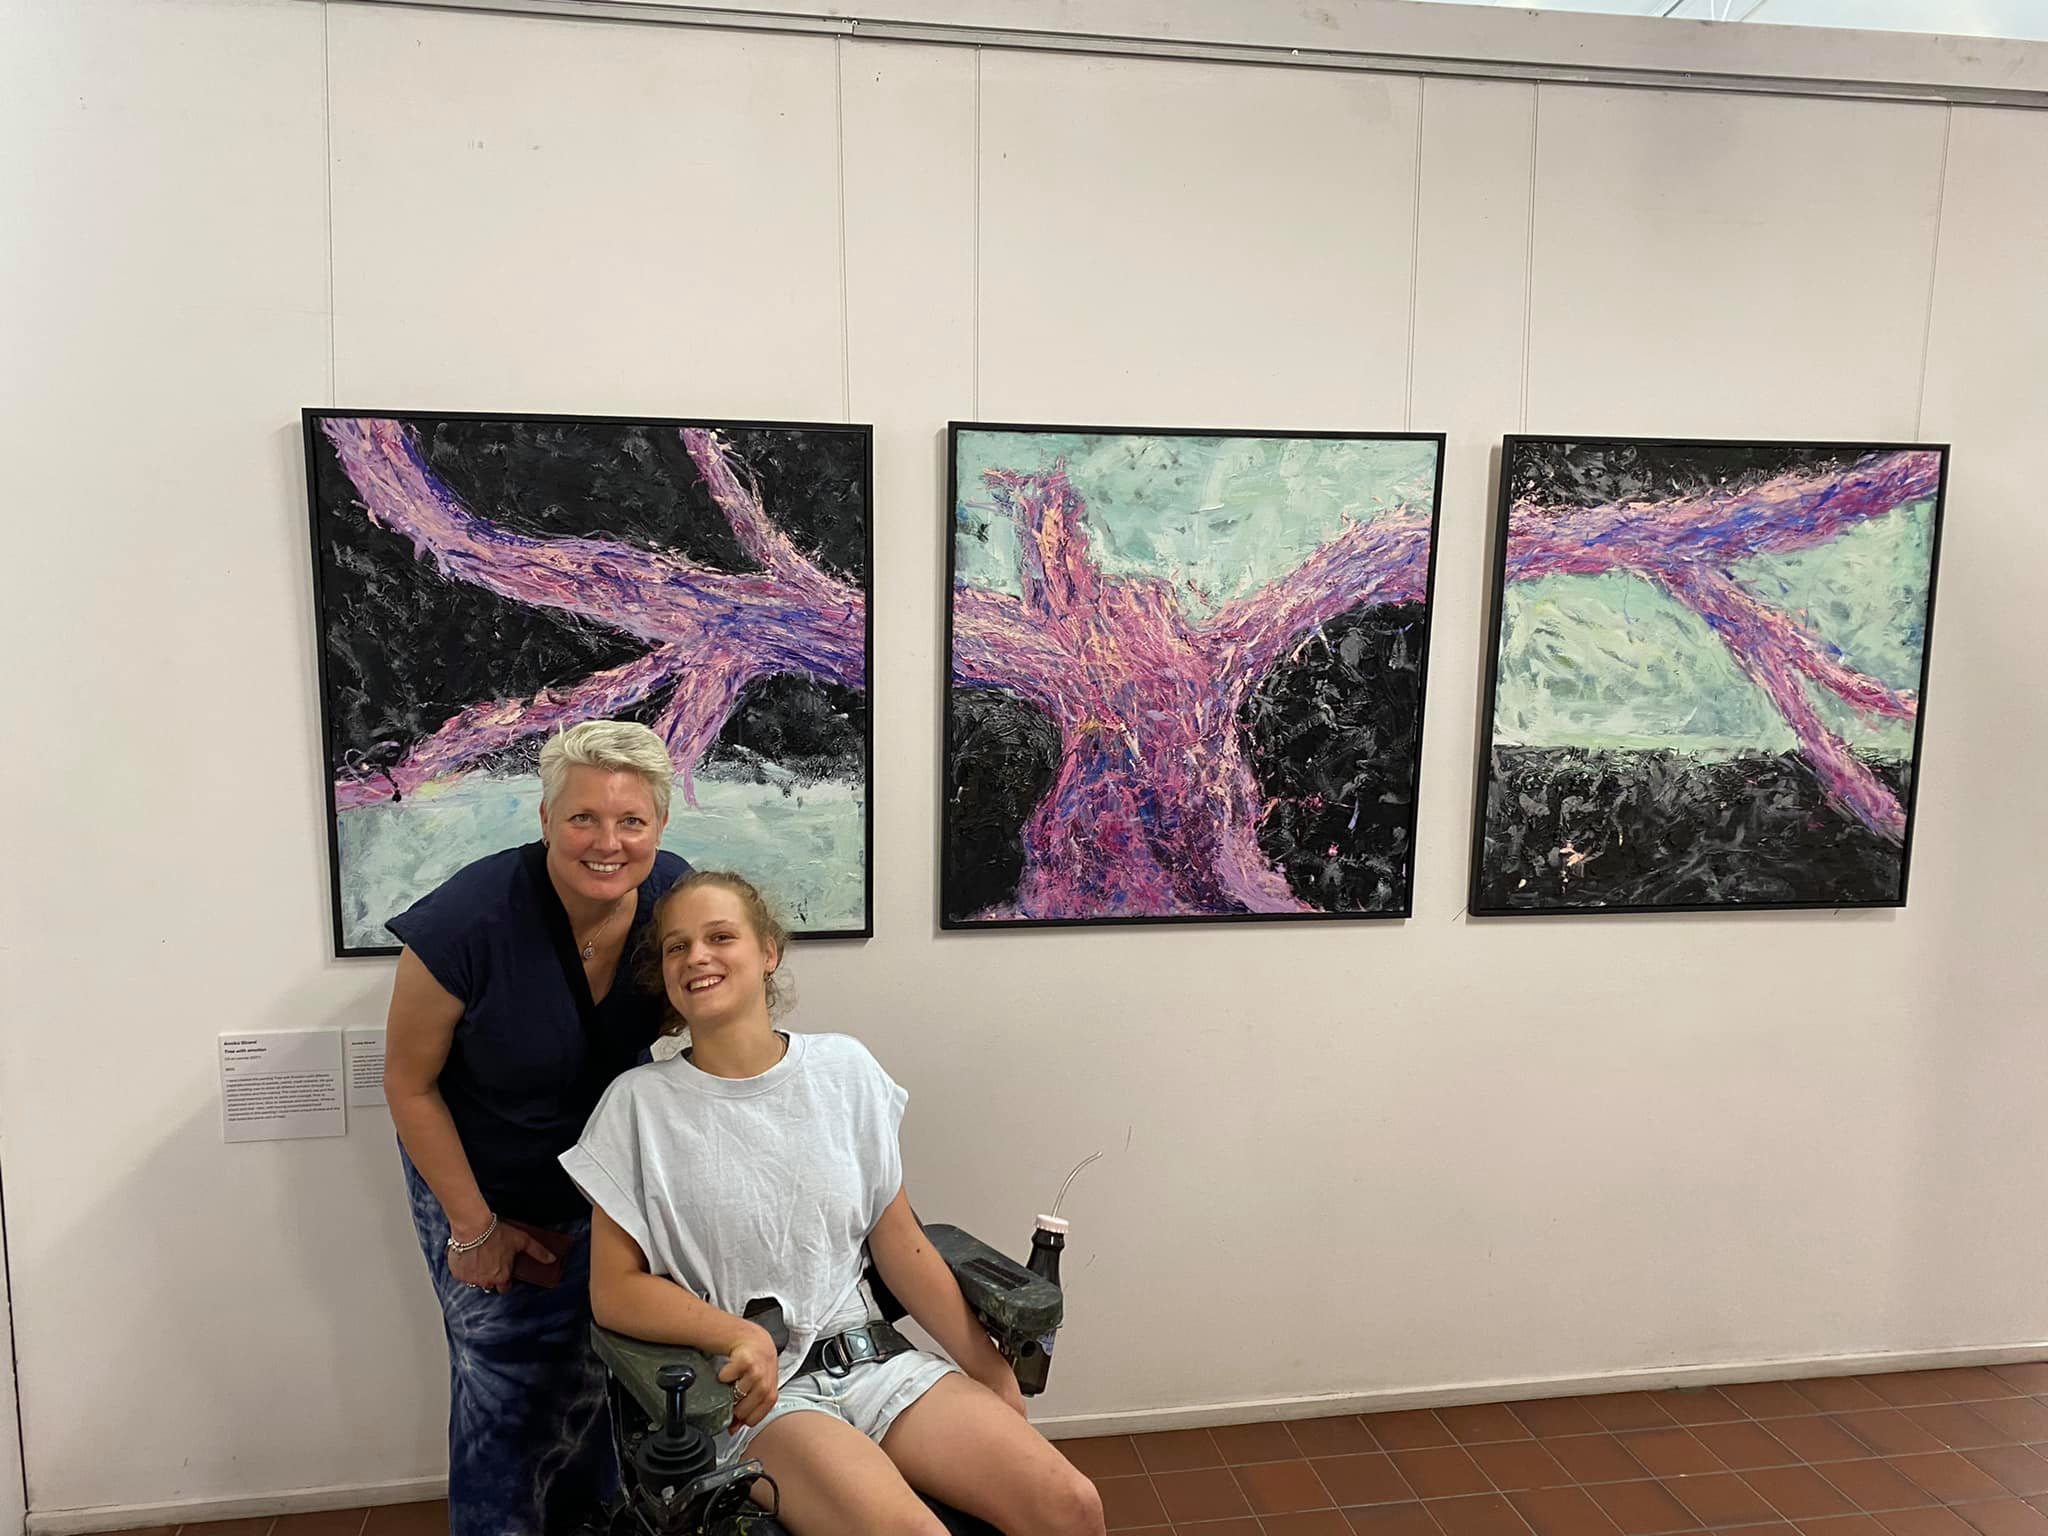 Annika and another person in front of three of her artworks hung on a wall in a gallery